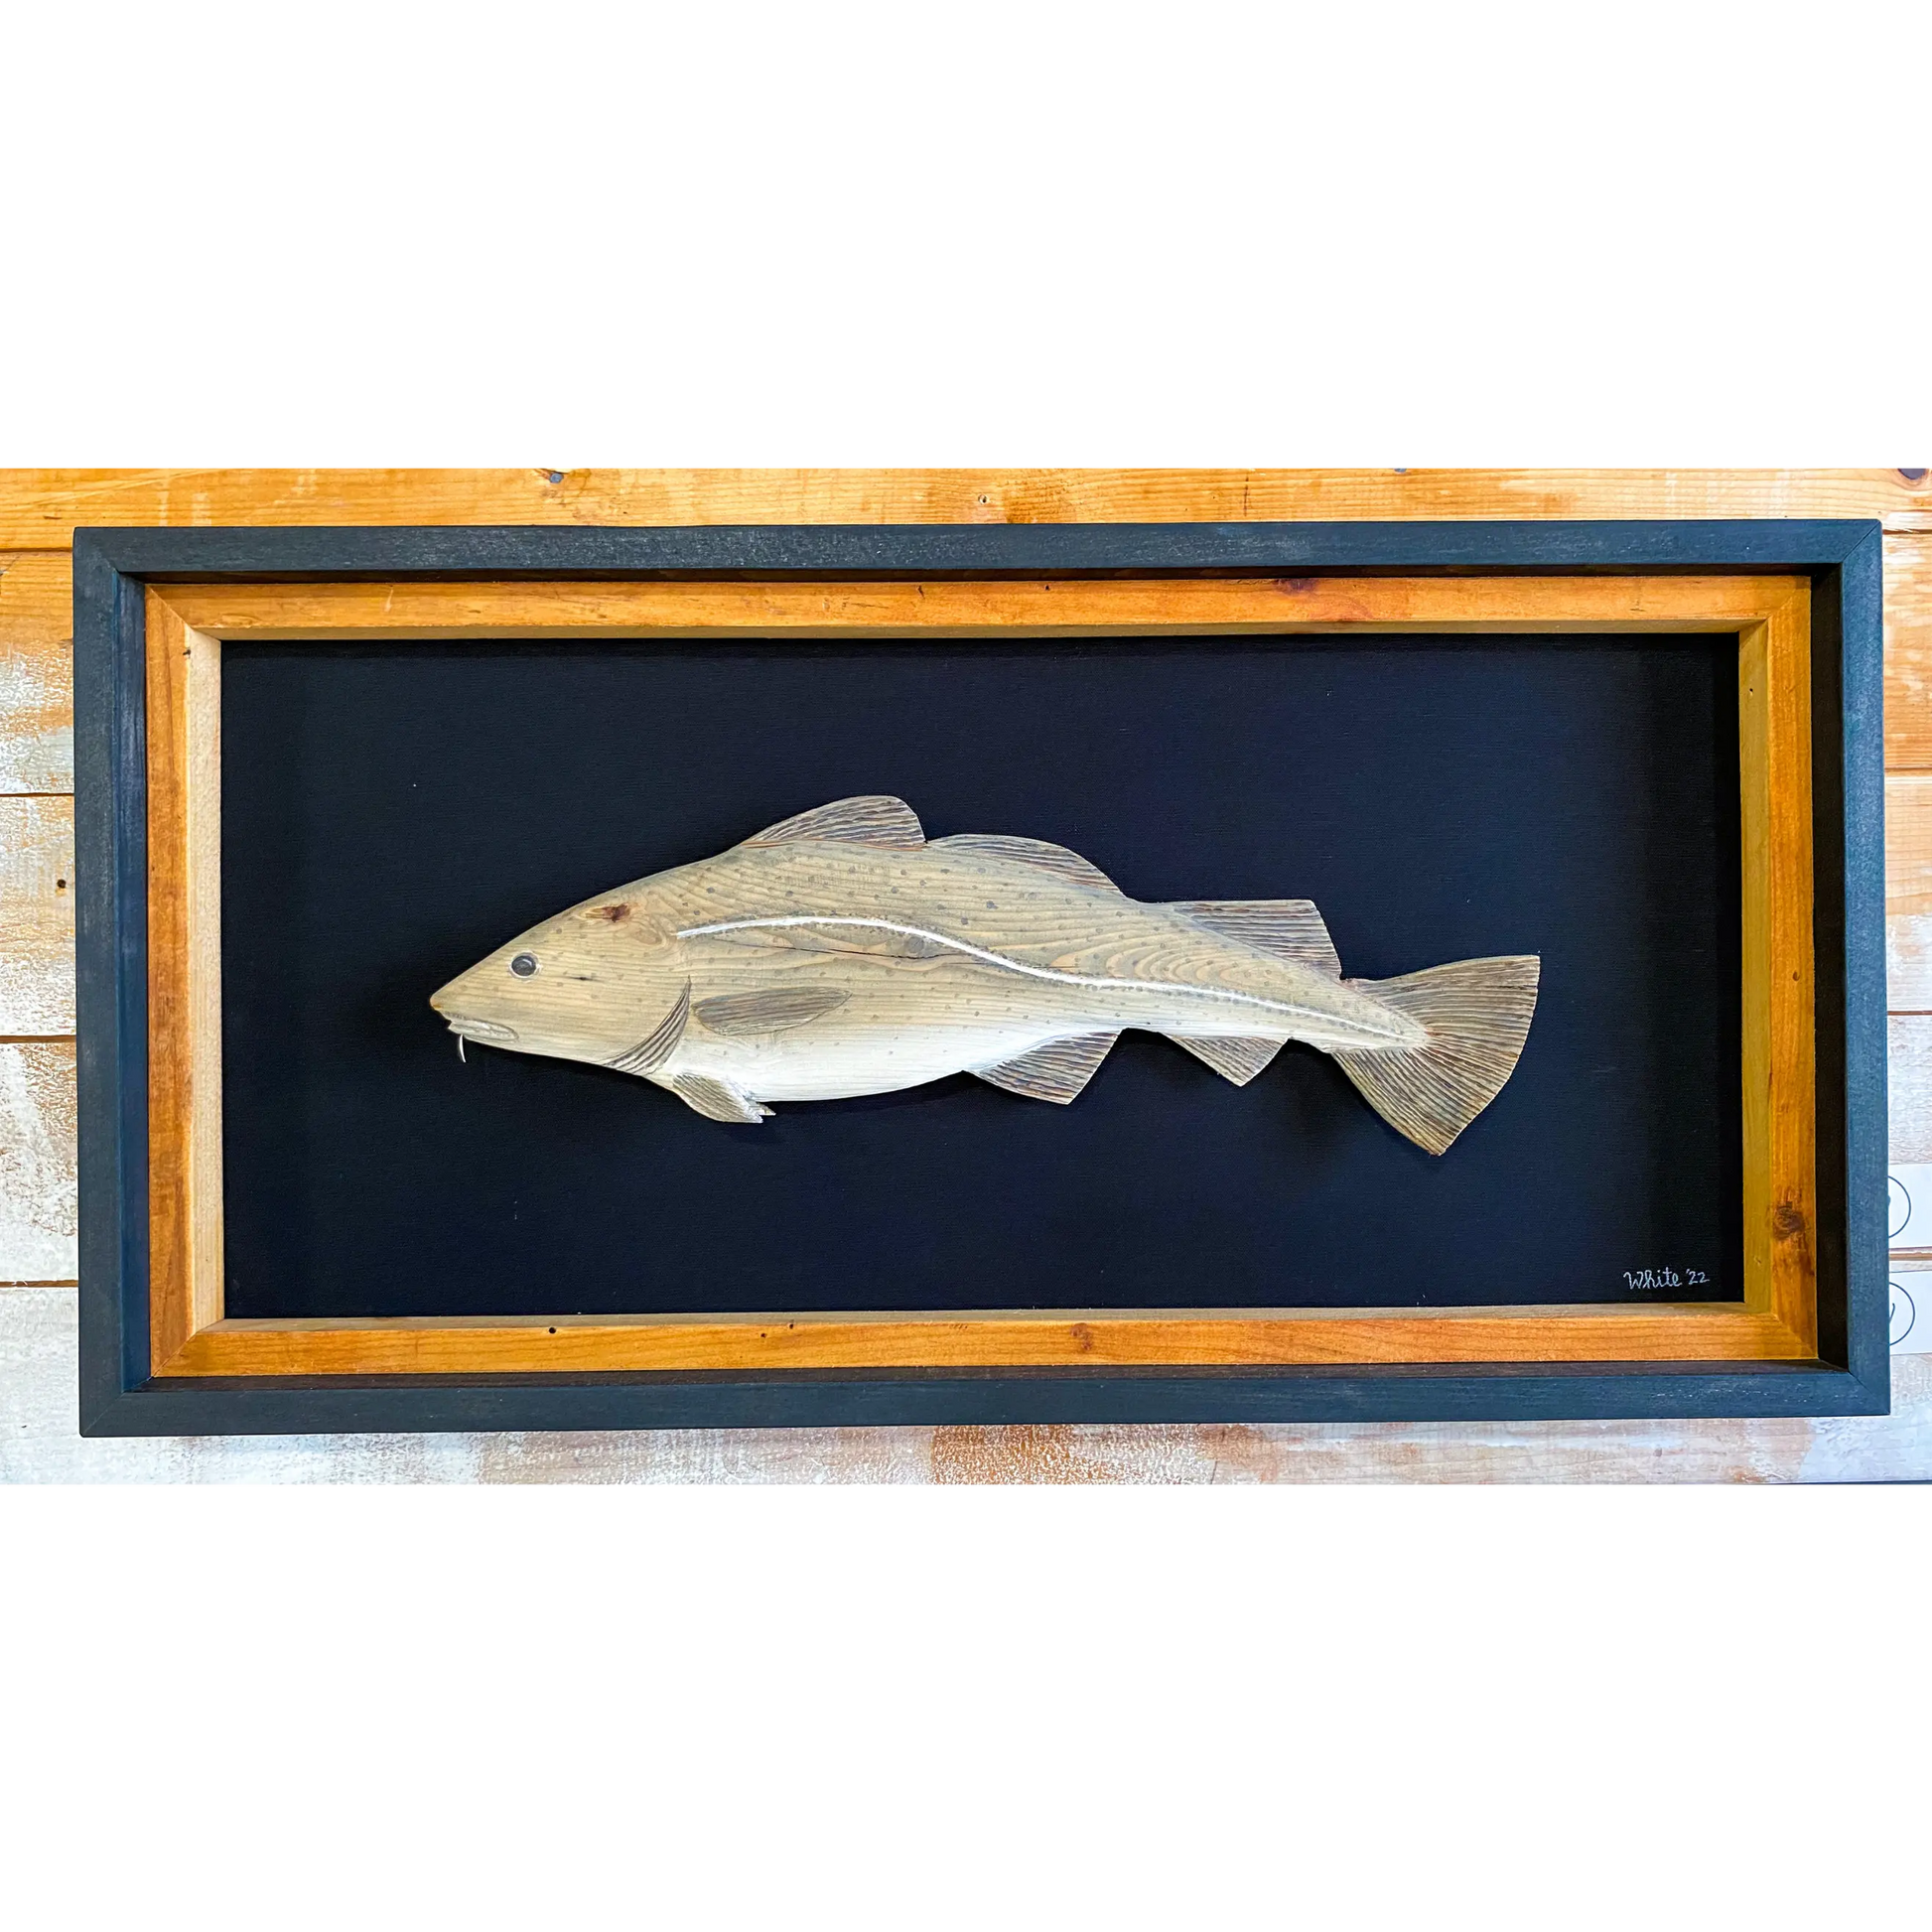 "The Cod Fish" is an original driftwood mixed-media art piece of a cod fish